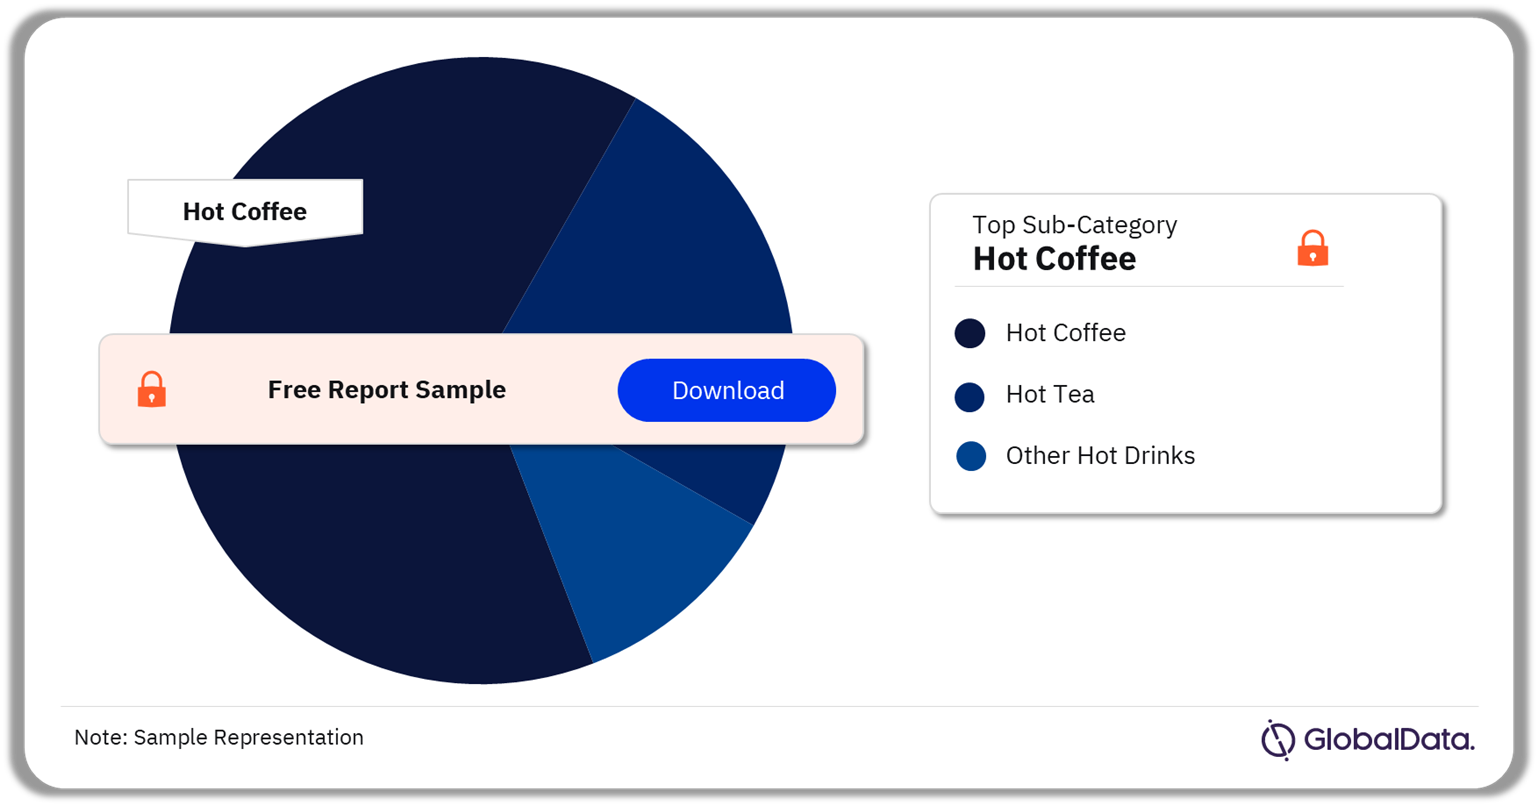 Hot Drinks Beverages Market Analysis by Sub-Categories, Q4 2023 (%)